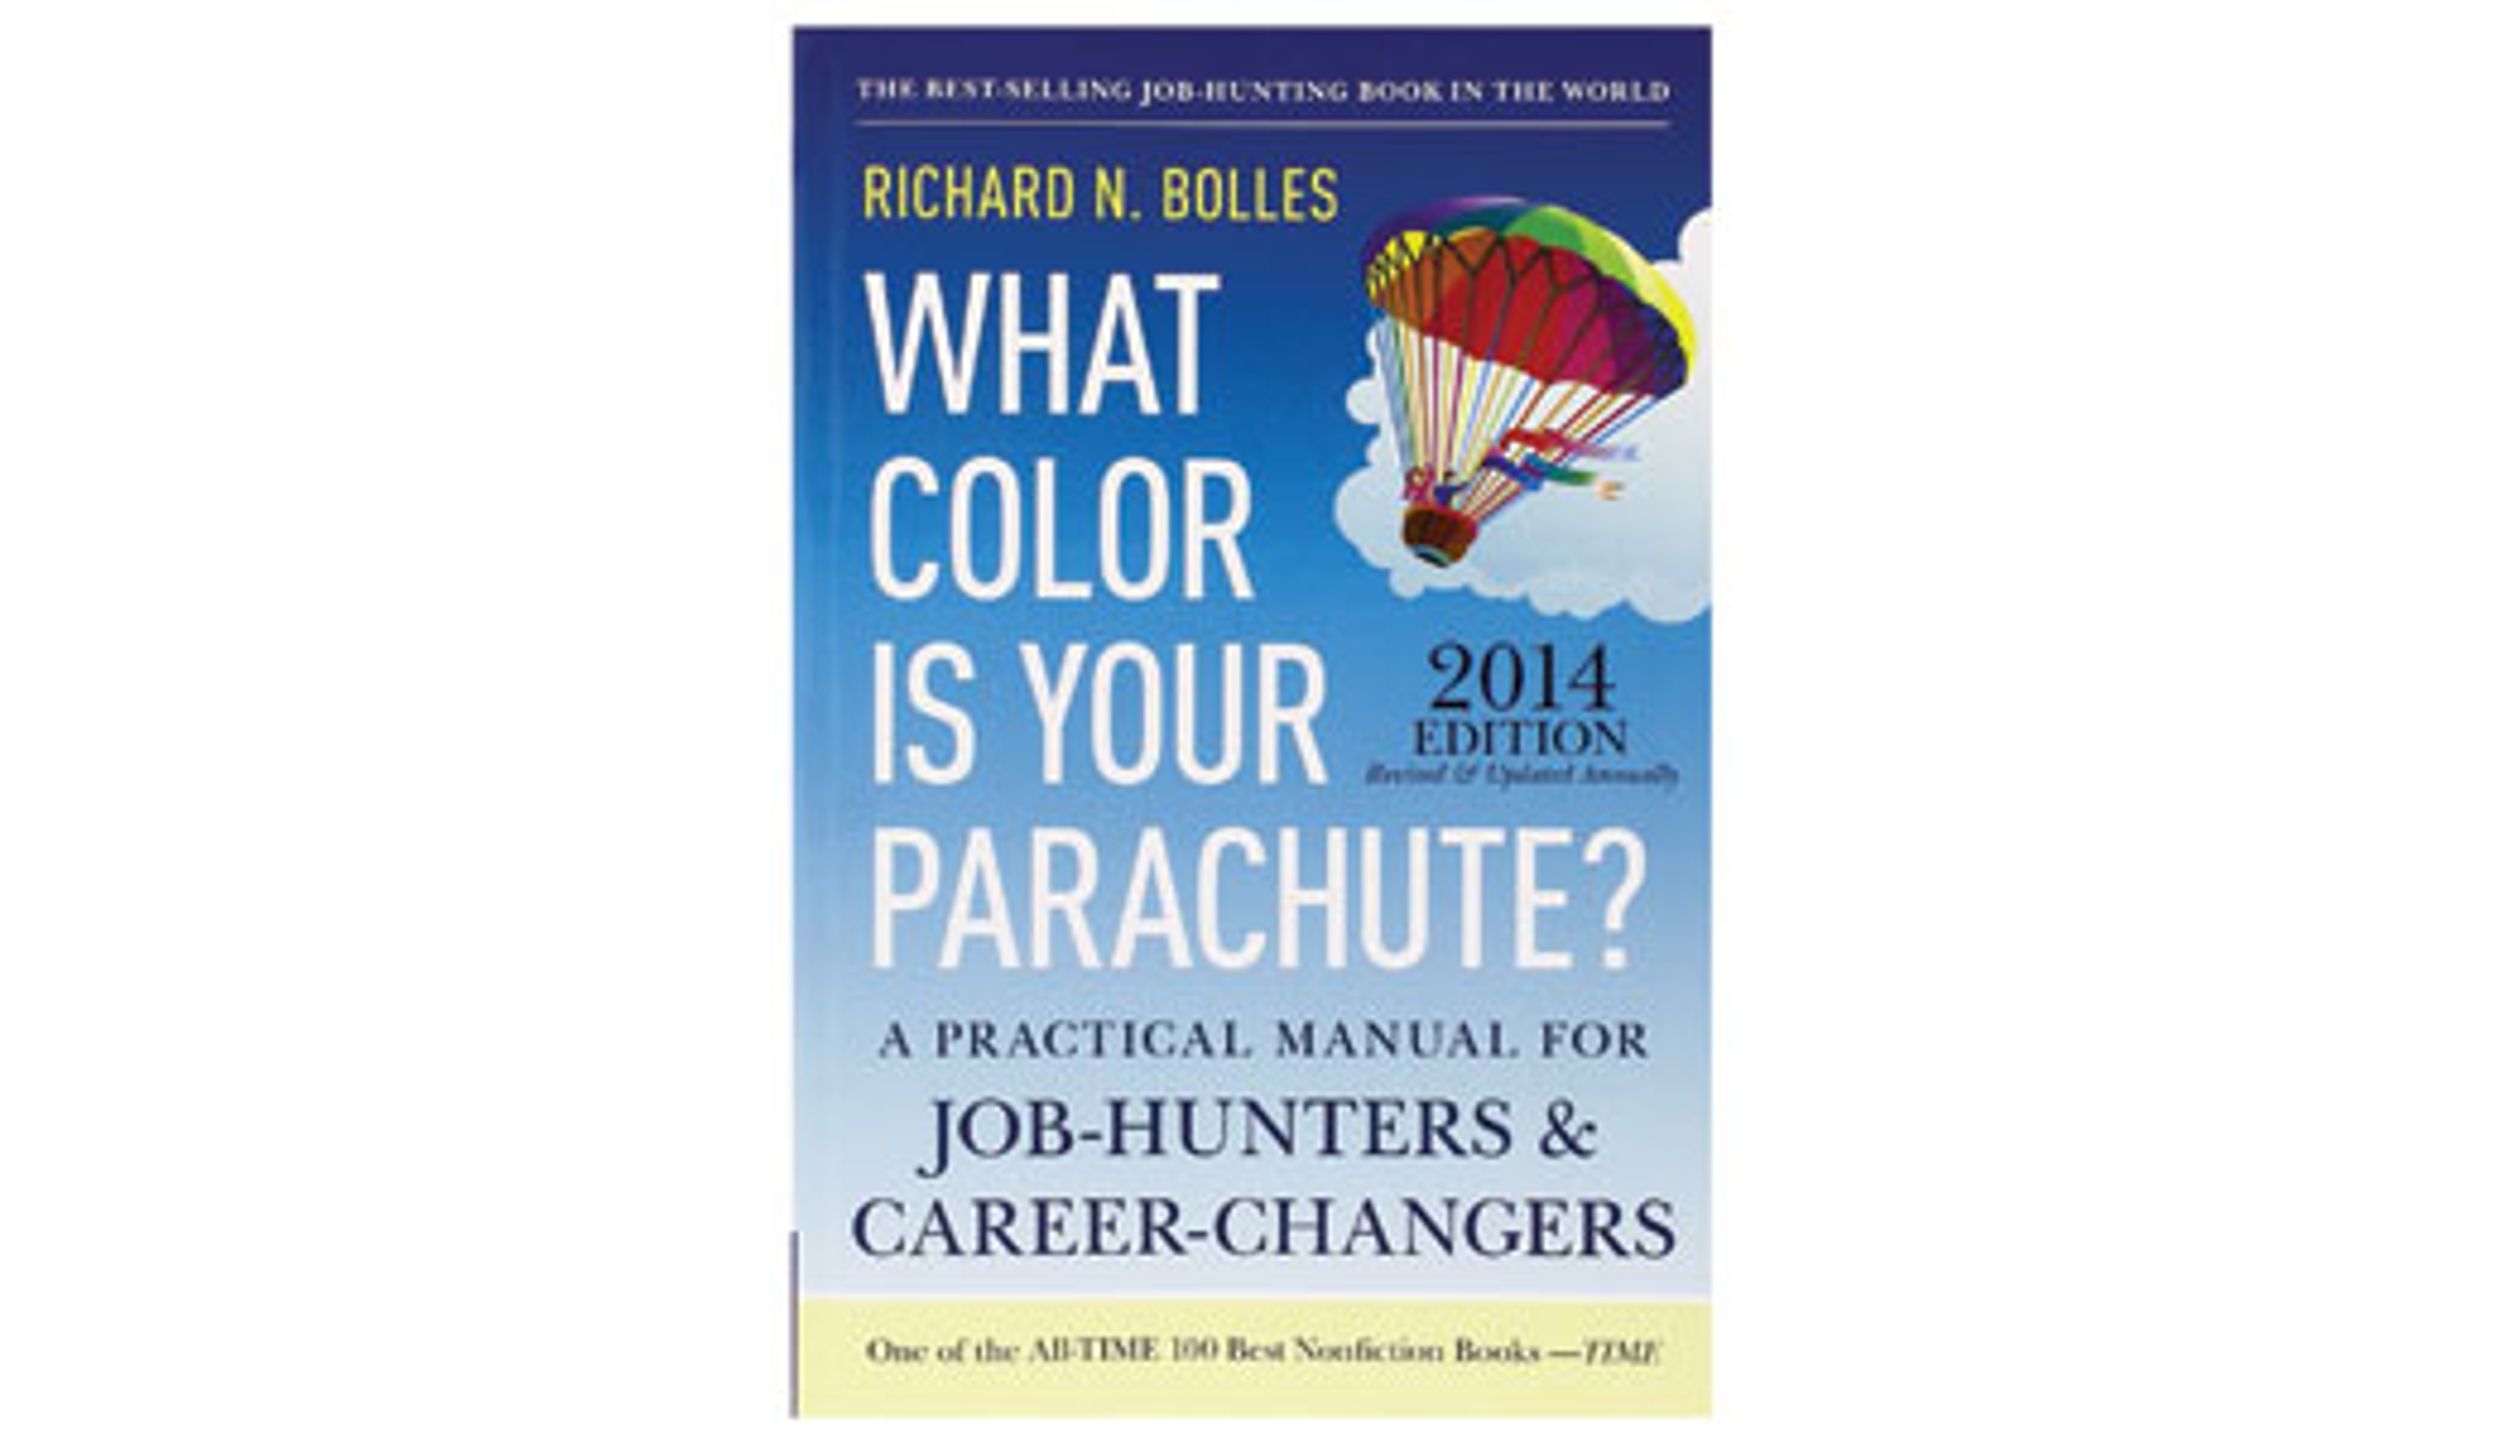 Last Call: “What Color Is Your Parachute?” and Other Stupid Questions